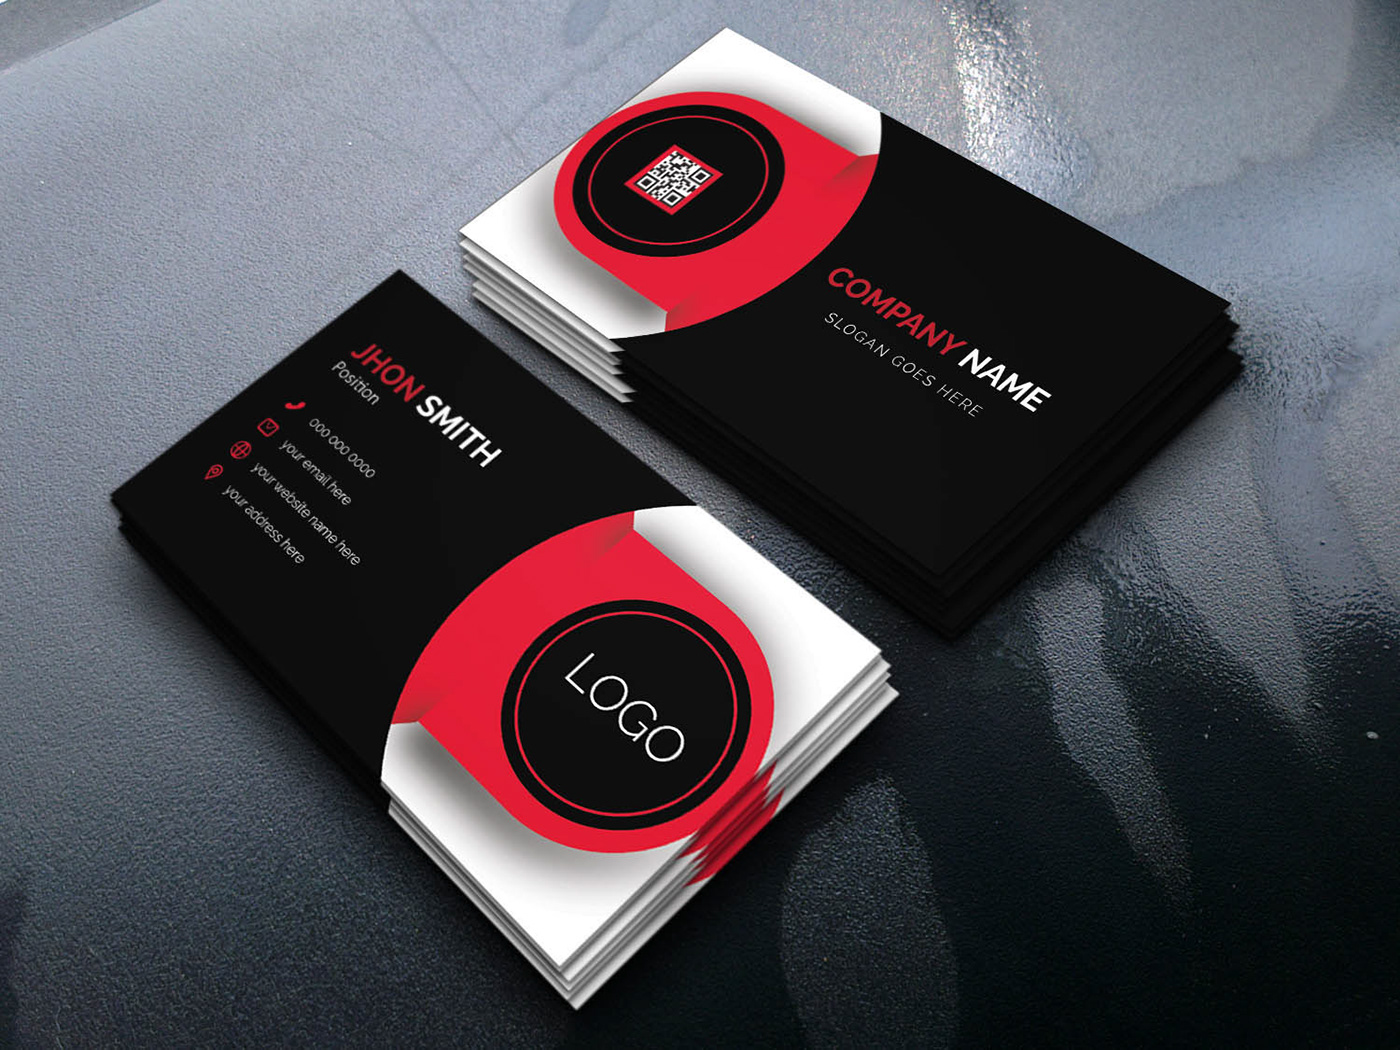 Business card design Corporate Identity restaurant management branding  marketing materials professional networking Business Branding business card printing Hospitality Industry Managerial Roles